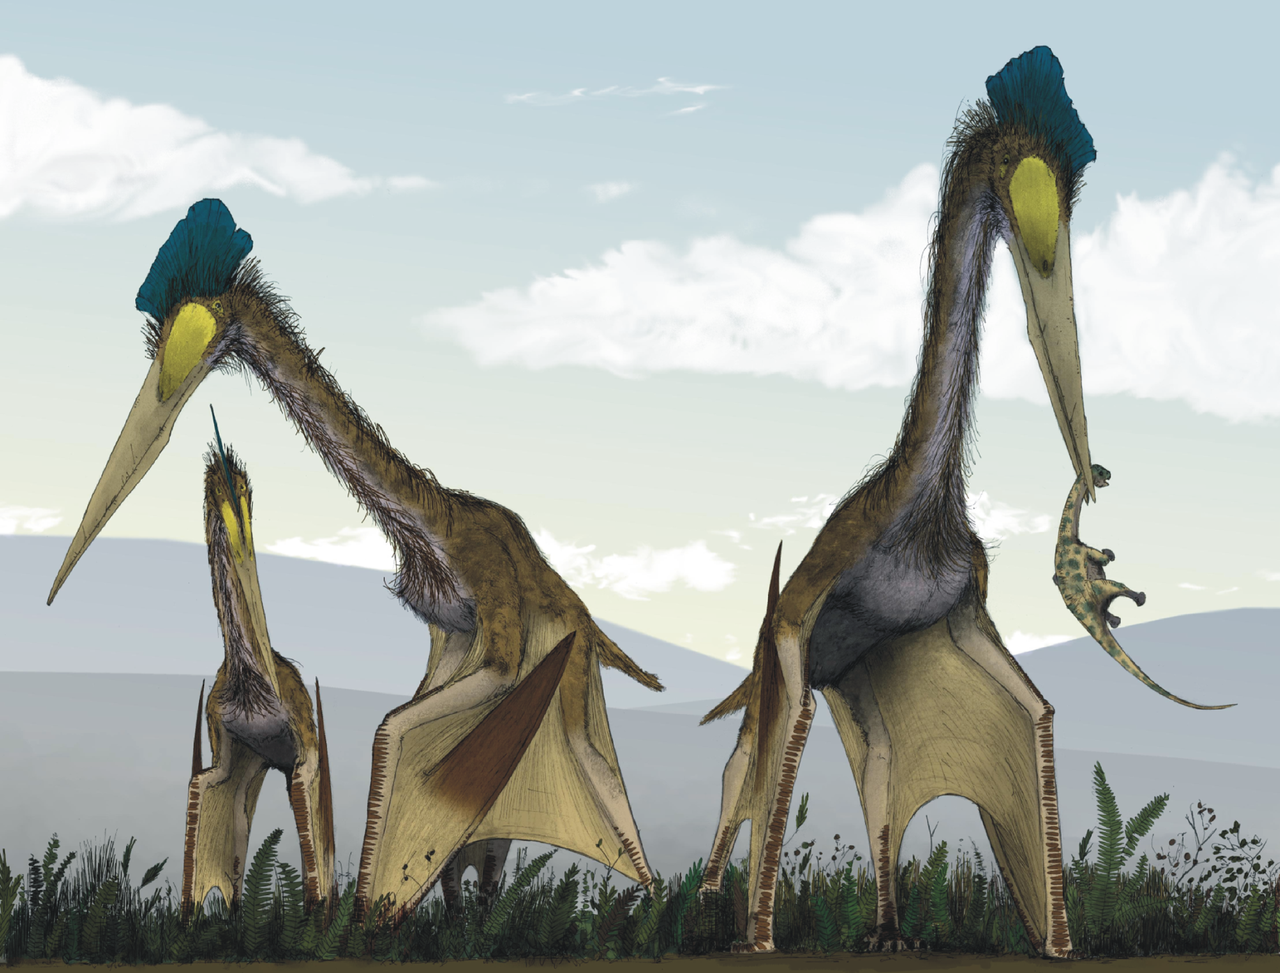 Life_restoration_of_a_group_of_giant_azhdarchids,_Quetzalcoatlus_northropi,_foraging_on_a_Cretaceous_fern_prairie CC BY 3.0